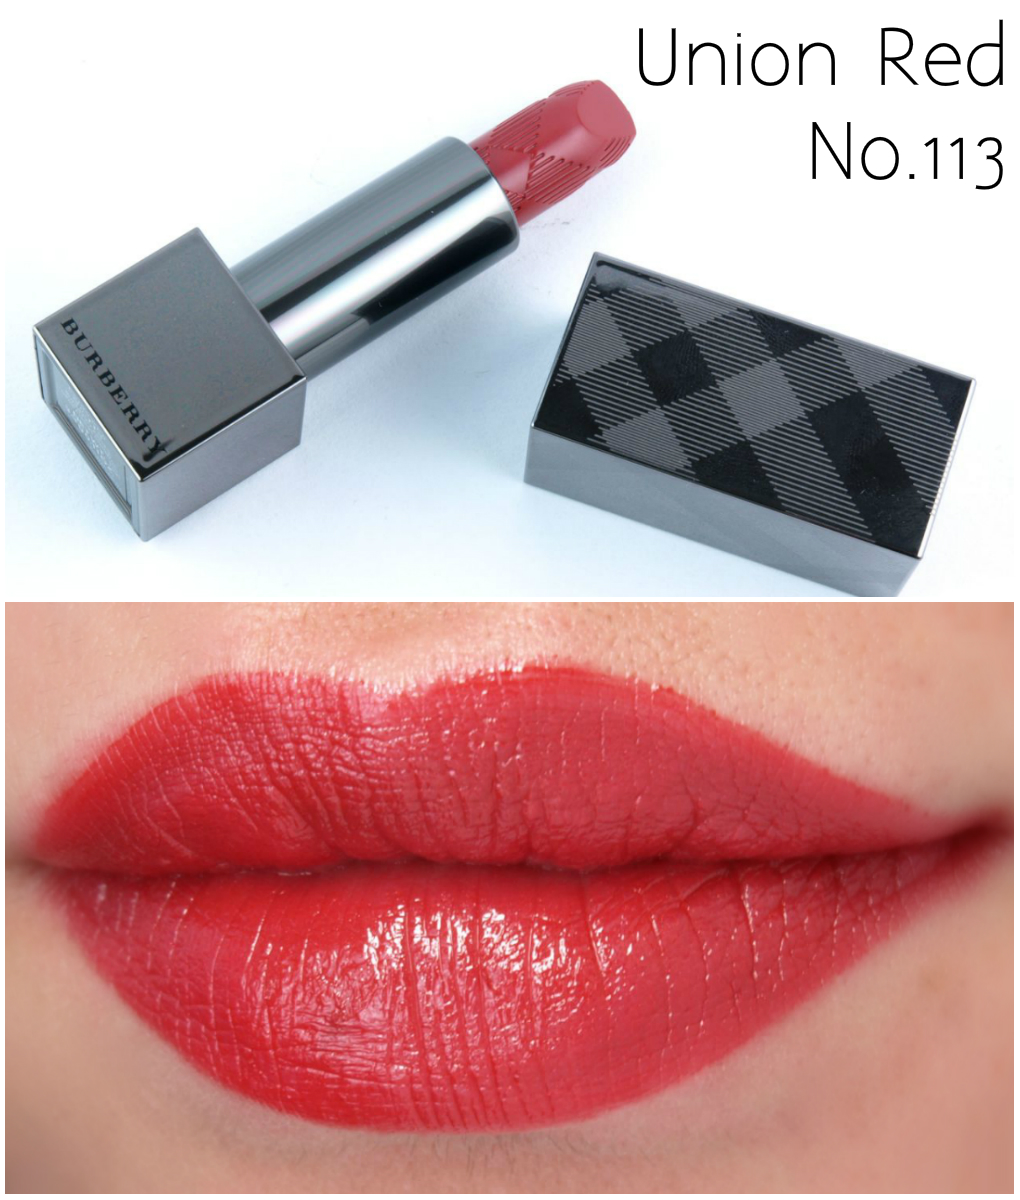 Burberry Kisses Hydrating Lip Color Lipstick in "No.113 Union Red": Review and Swatches